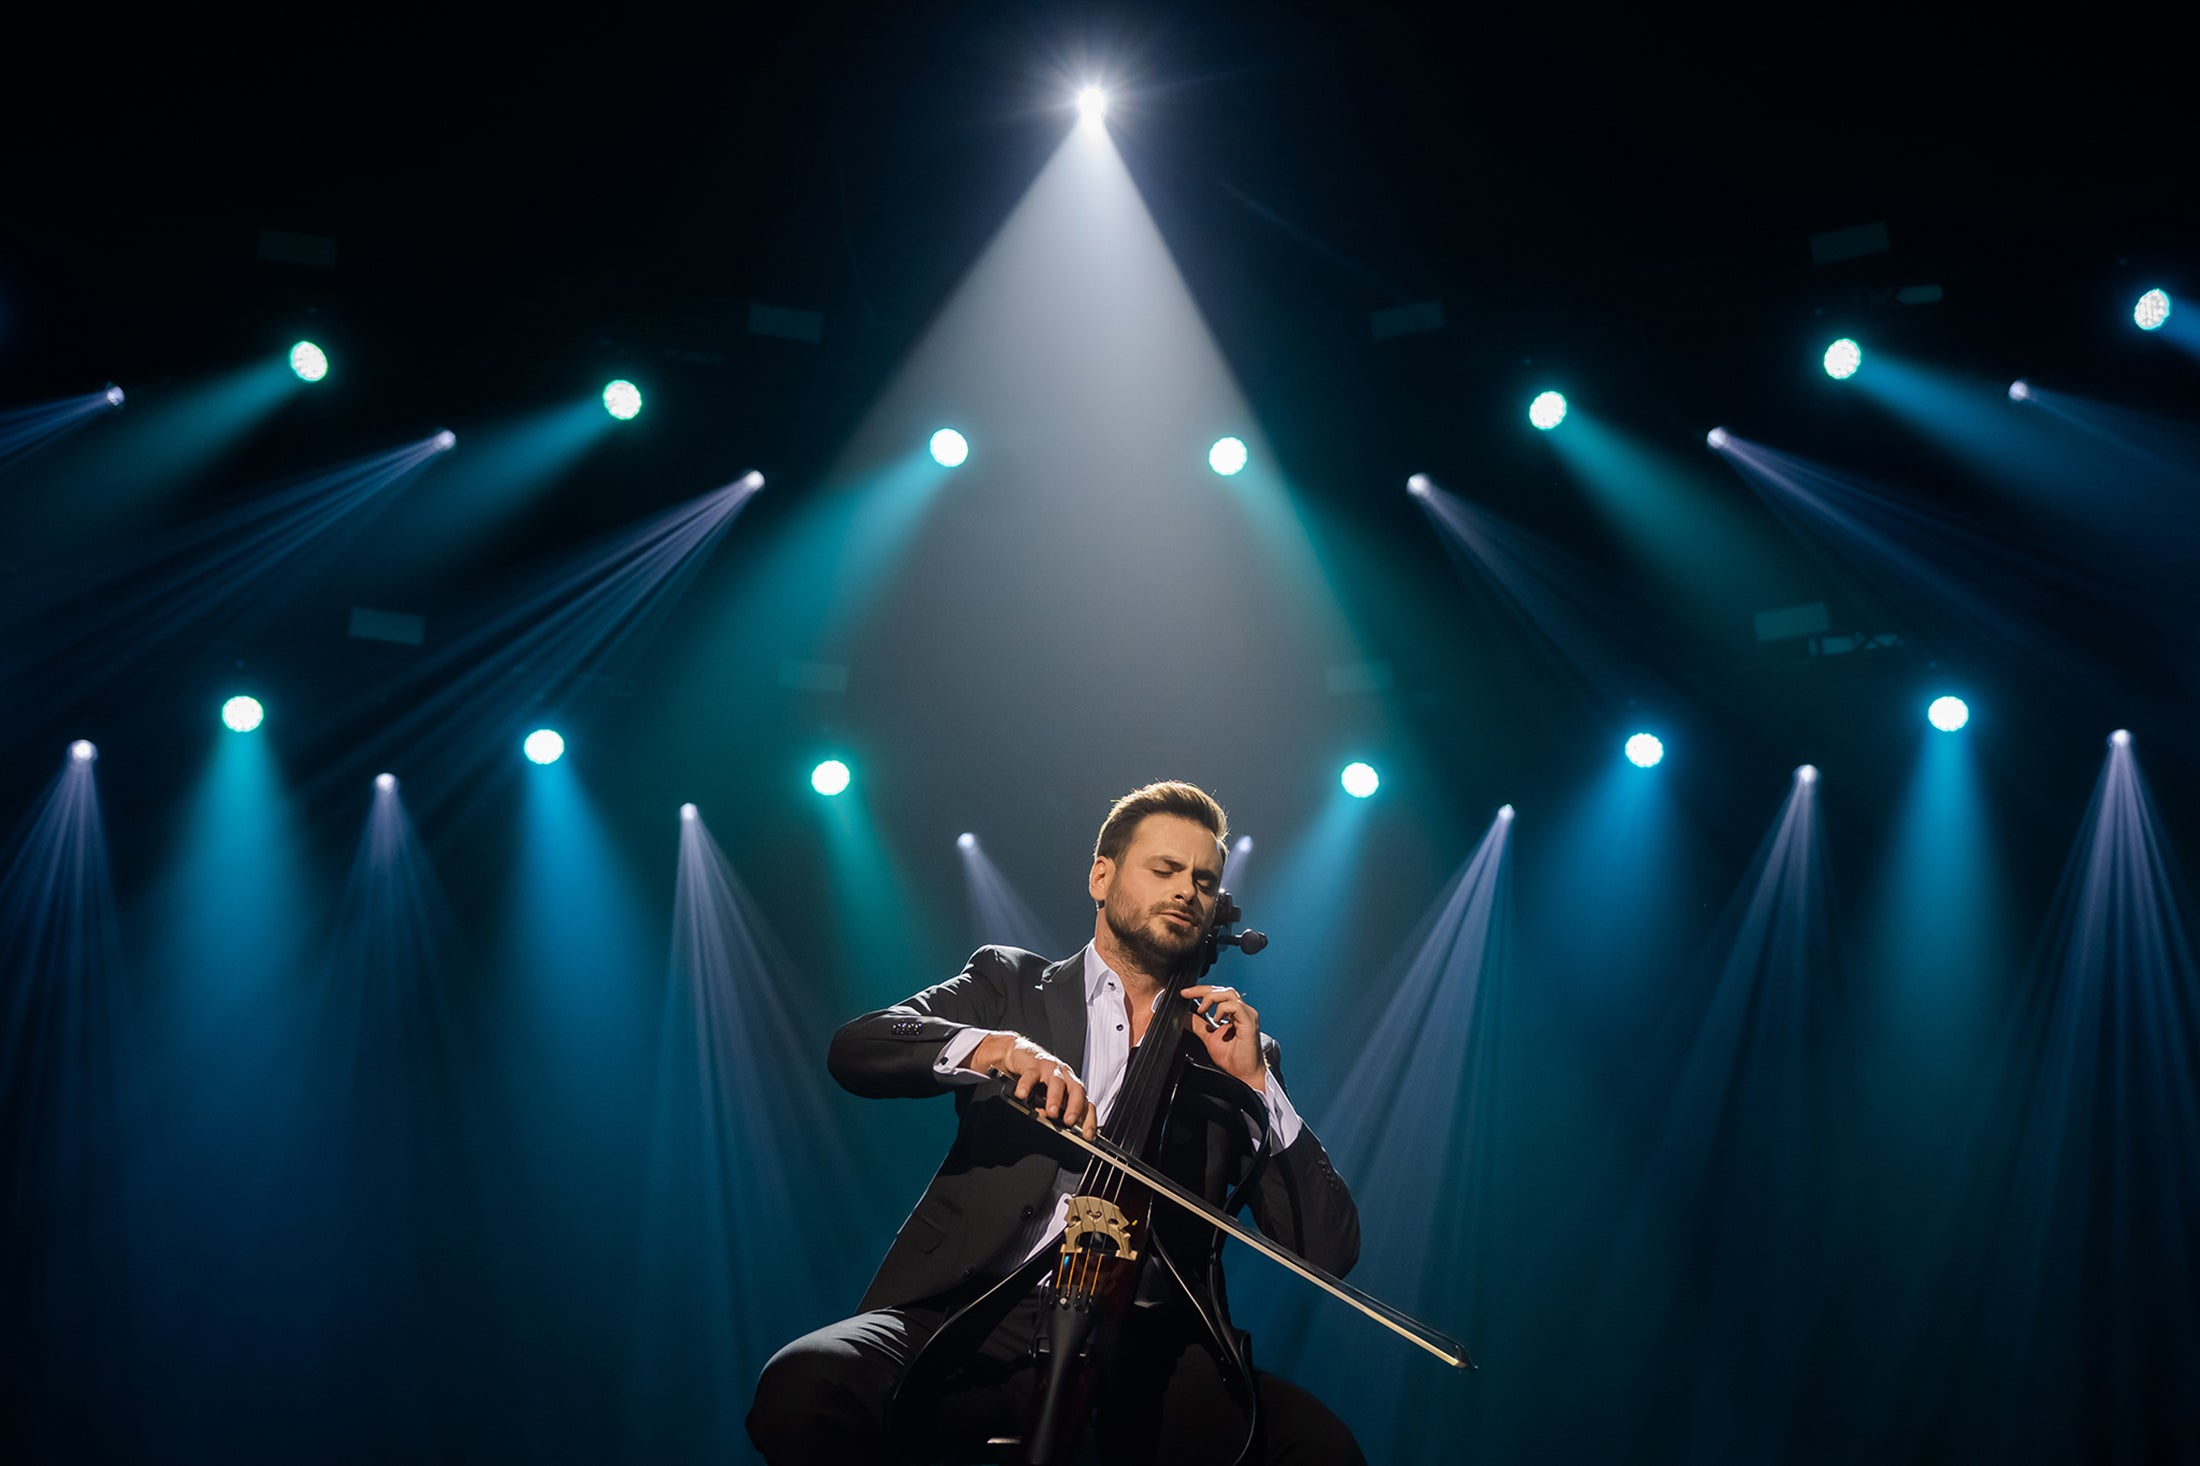 Main image for event titled Hauser: Rebel with a Cello